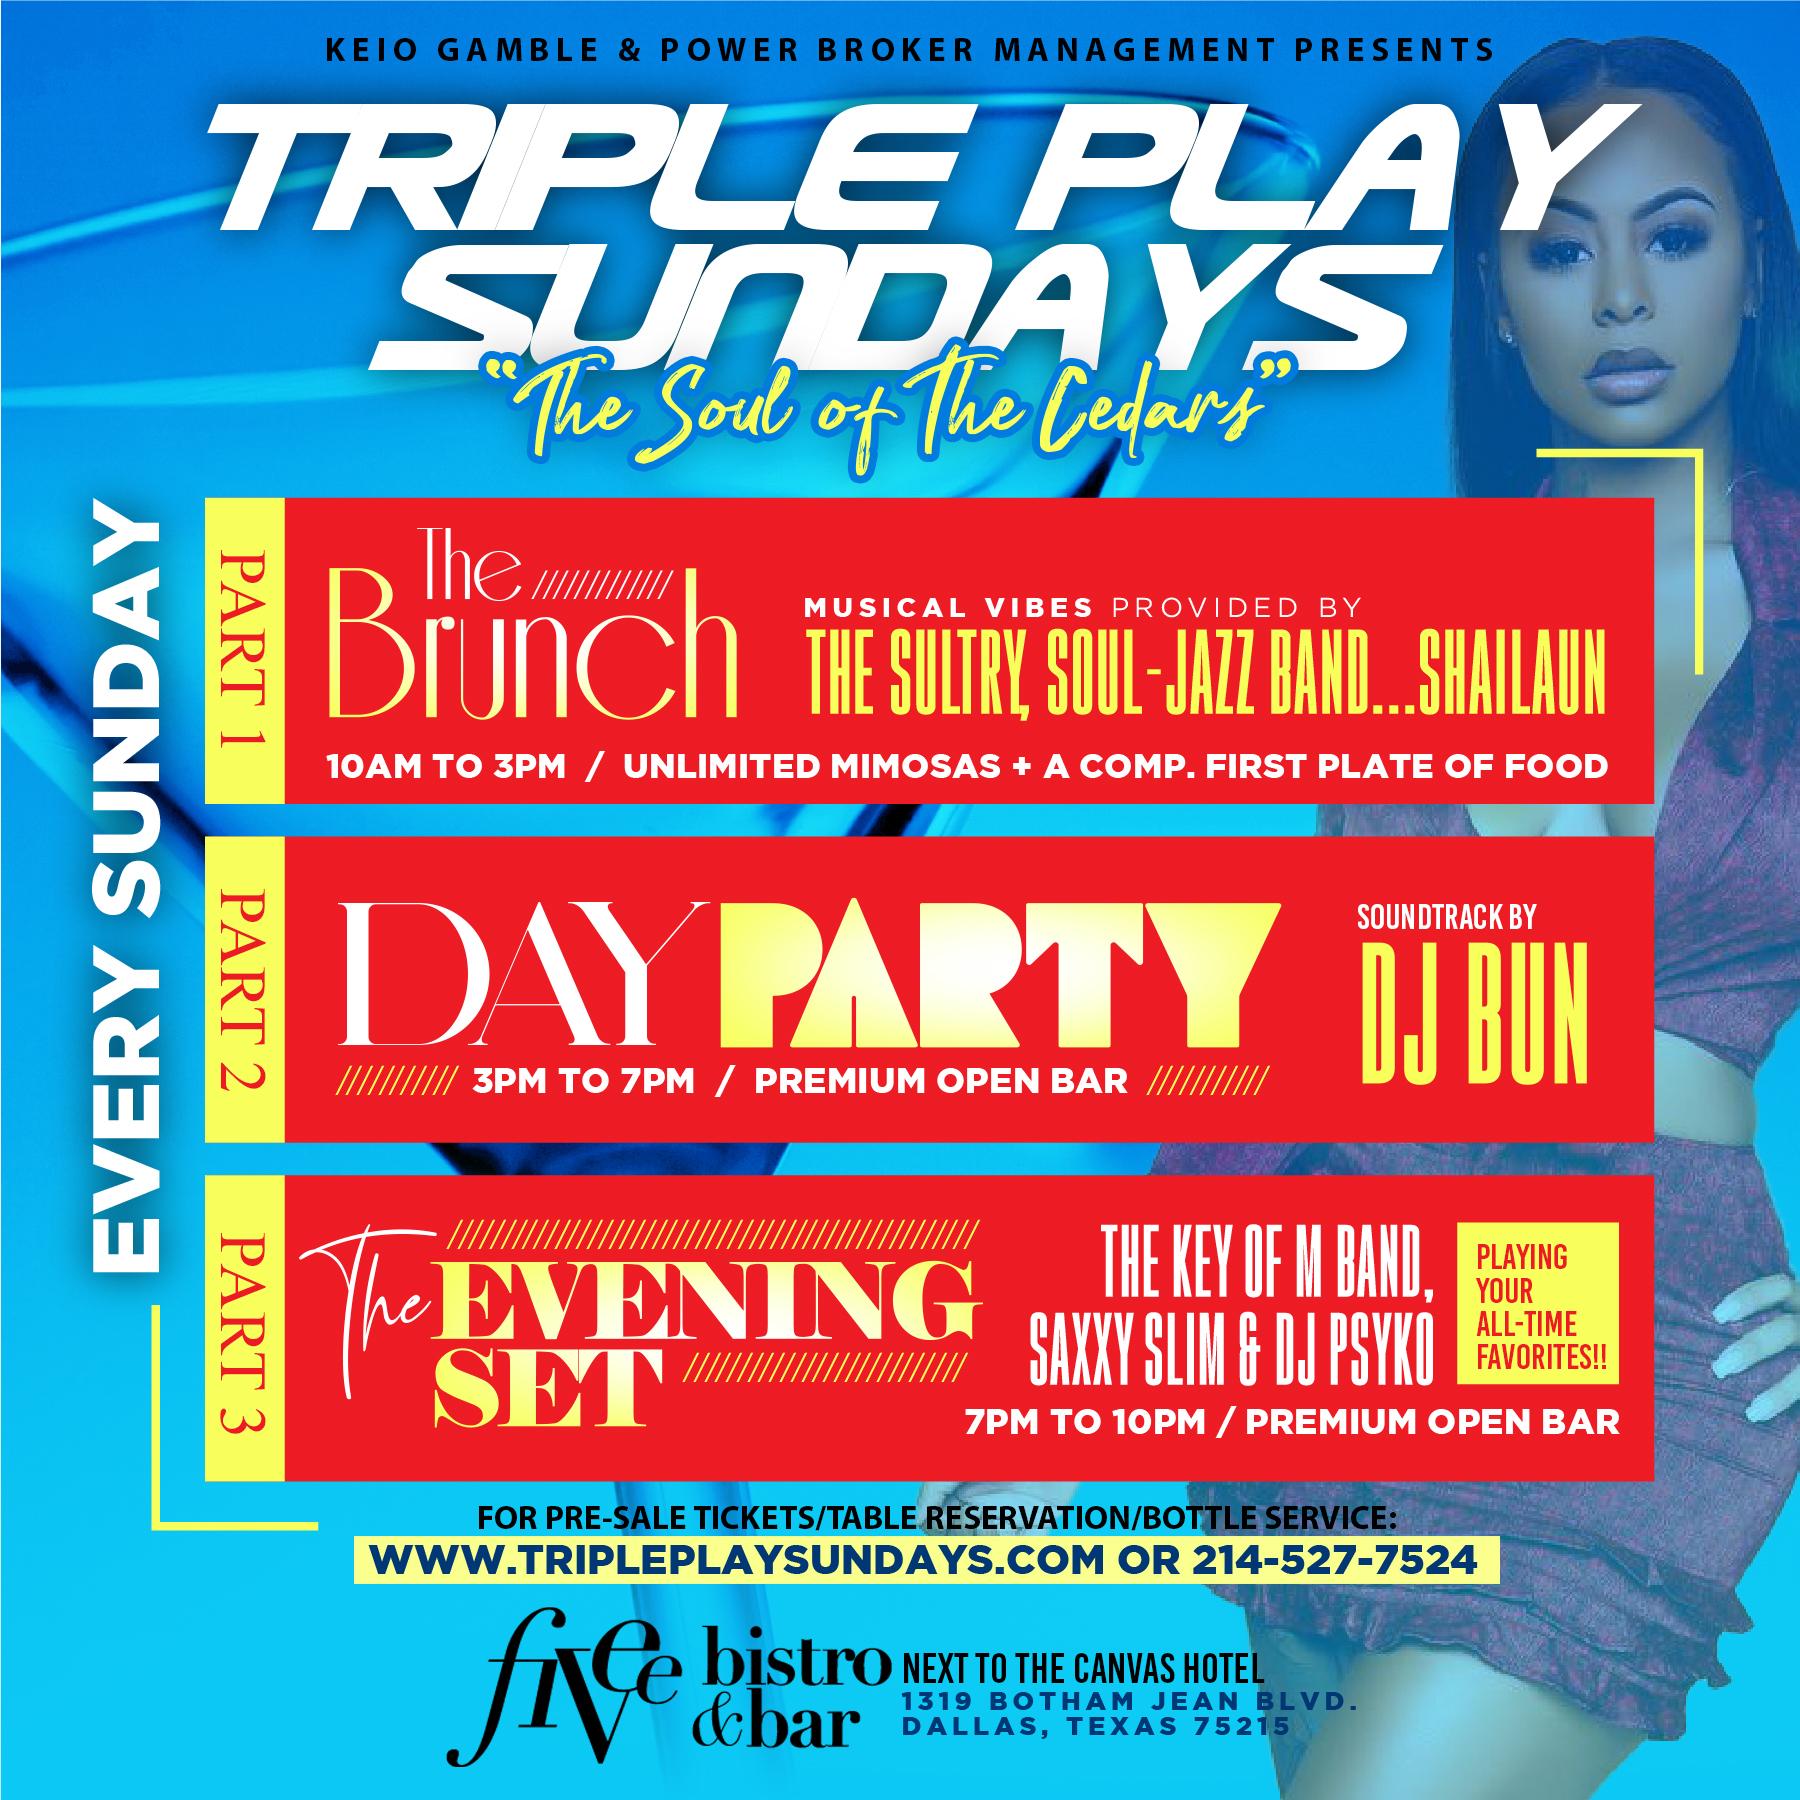 Triple Play Sundays: The Brunch + The Day Party + The Evening Set